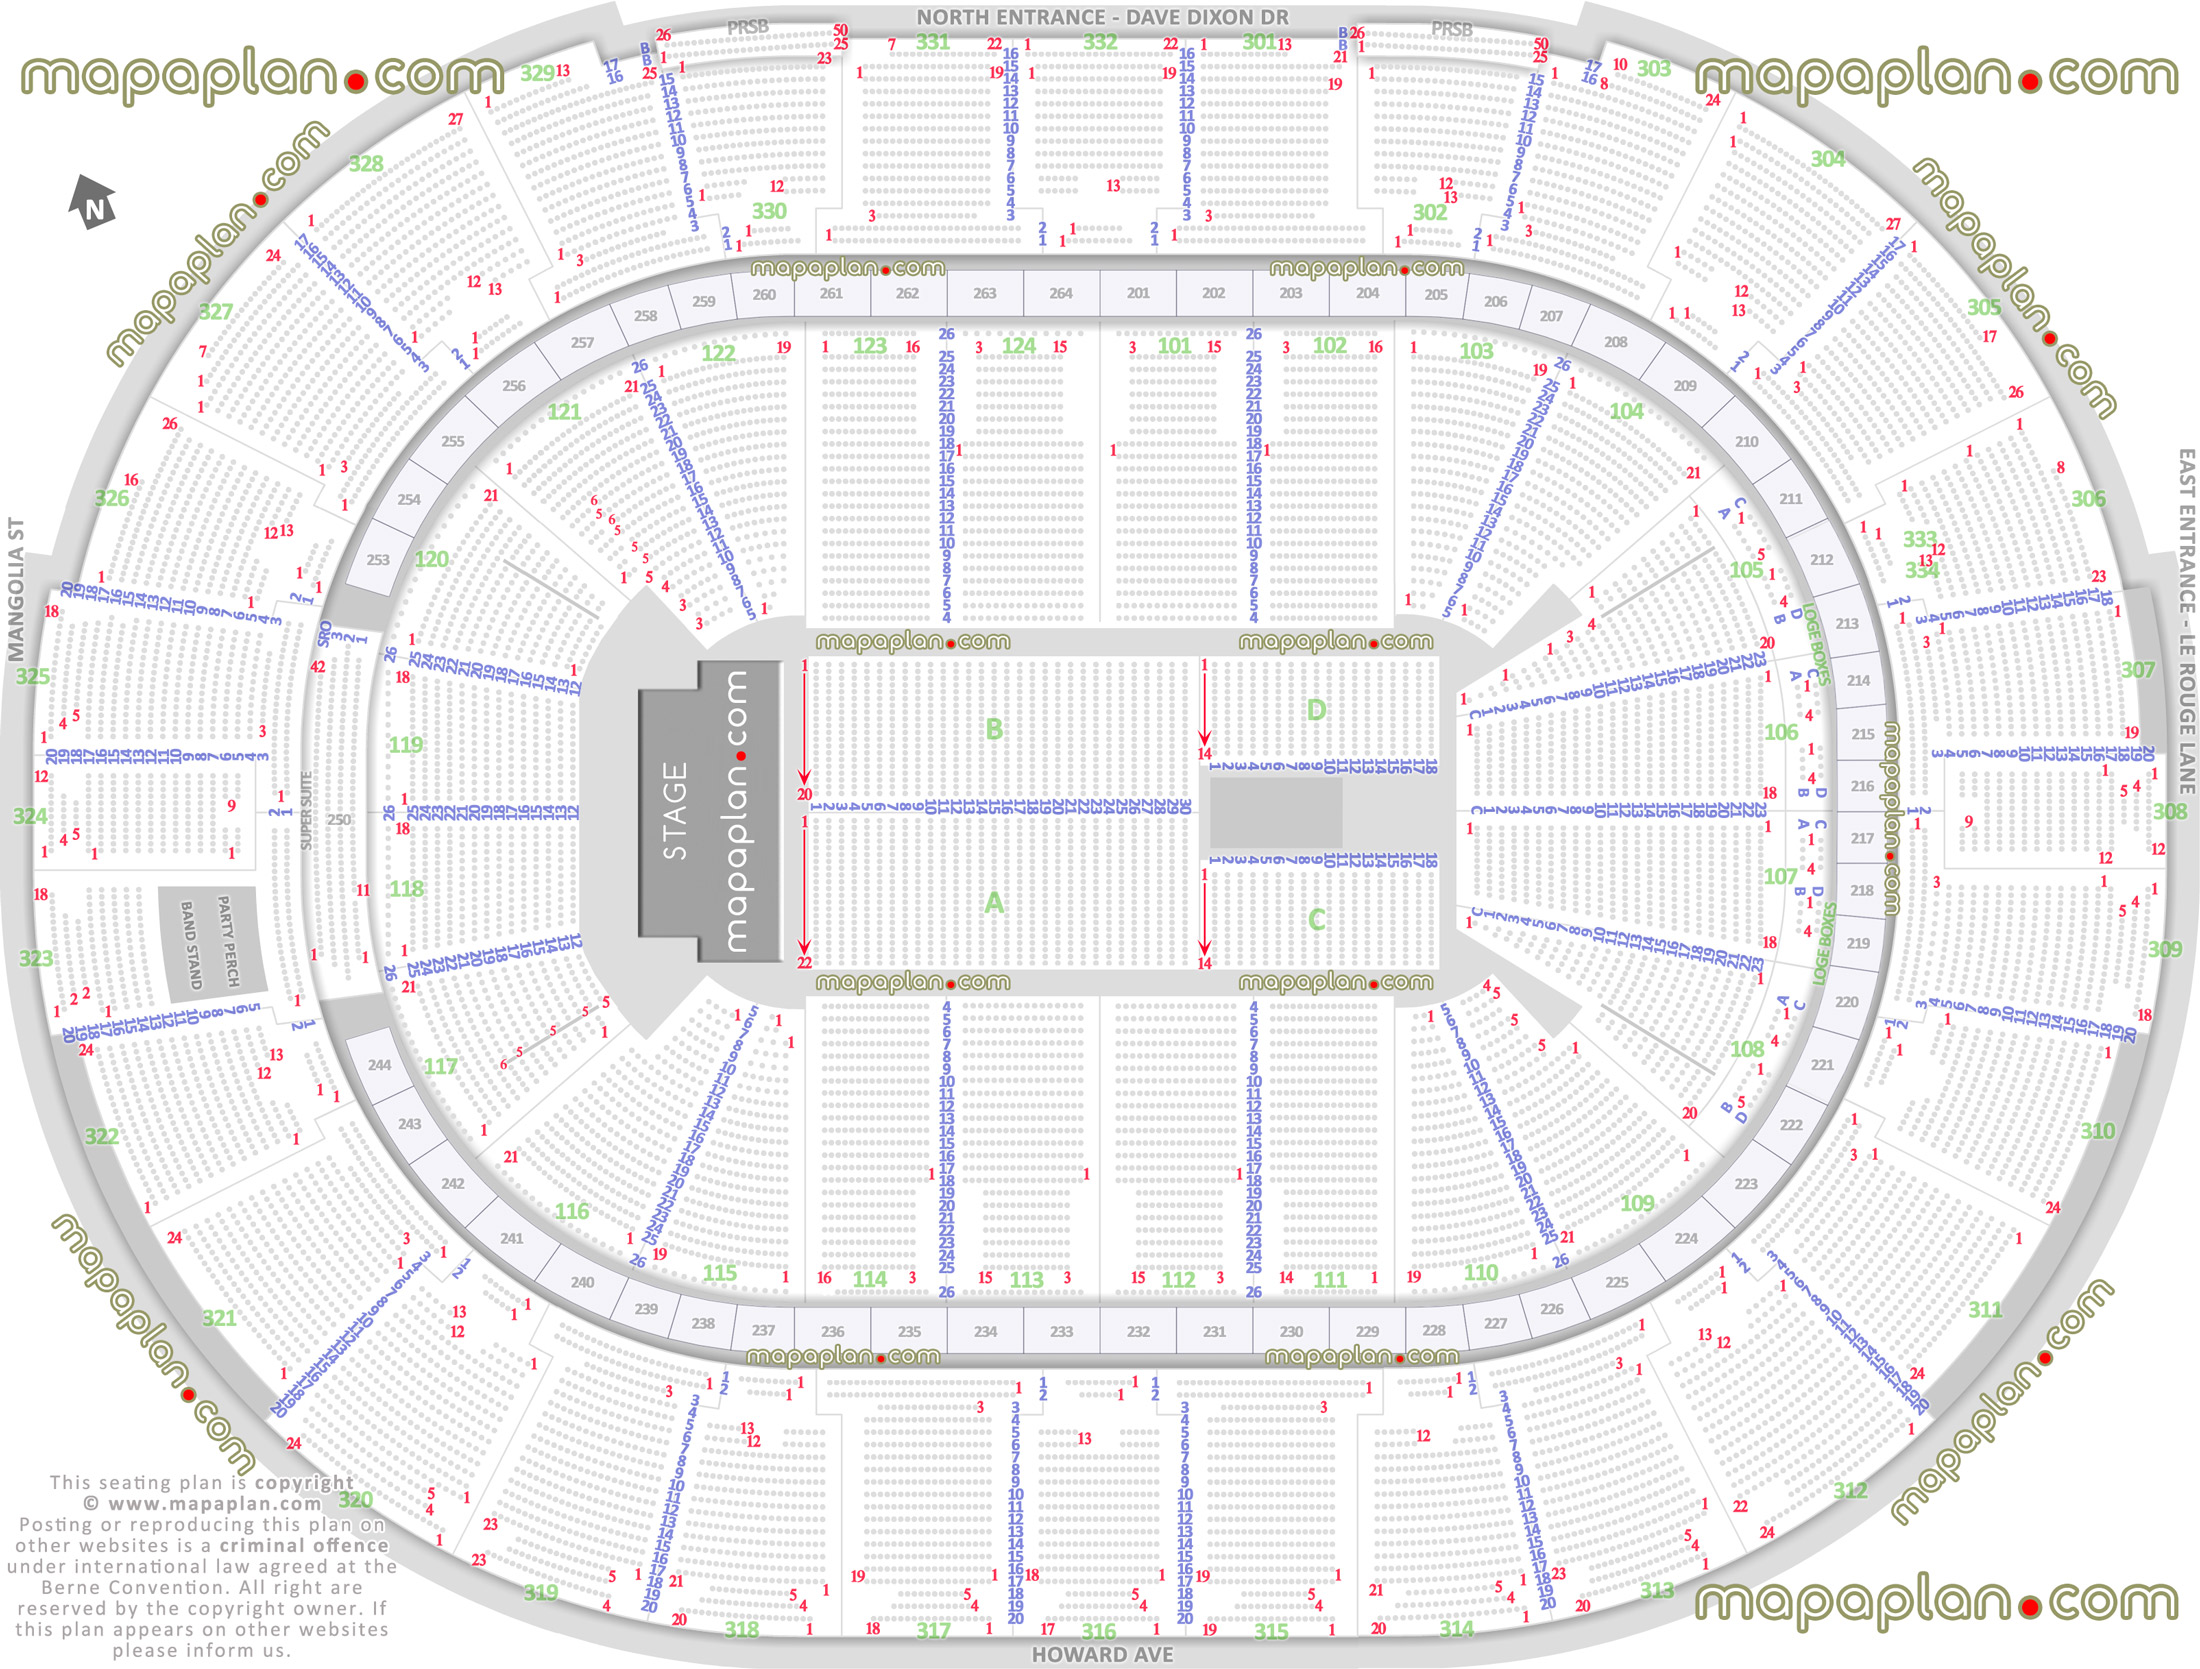 detailed seat row numbers end stage concert sections floor plan map arena lower upper level layout New Orleans Smoothie King Center arena seating chart